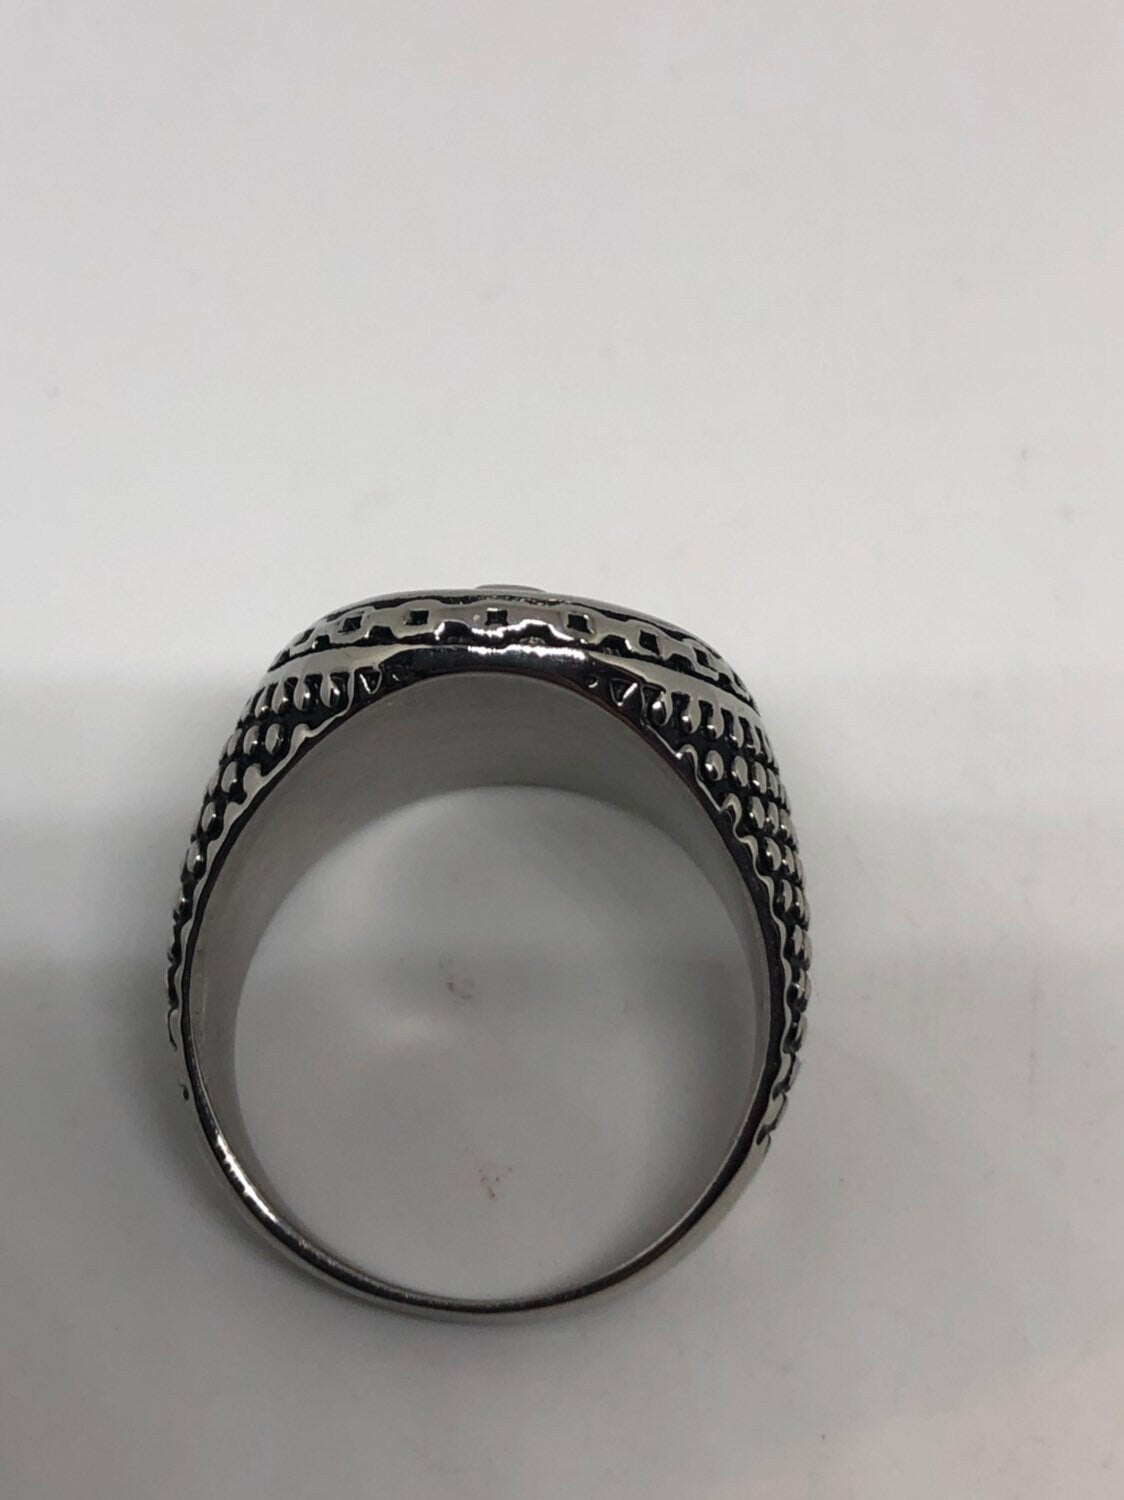 Vintage Silver Stainless Steel Gothic Anchor Mens Ring